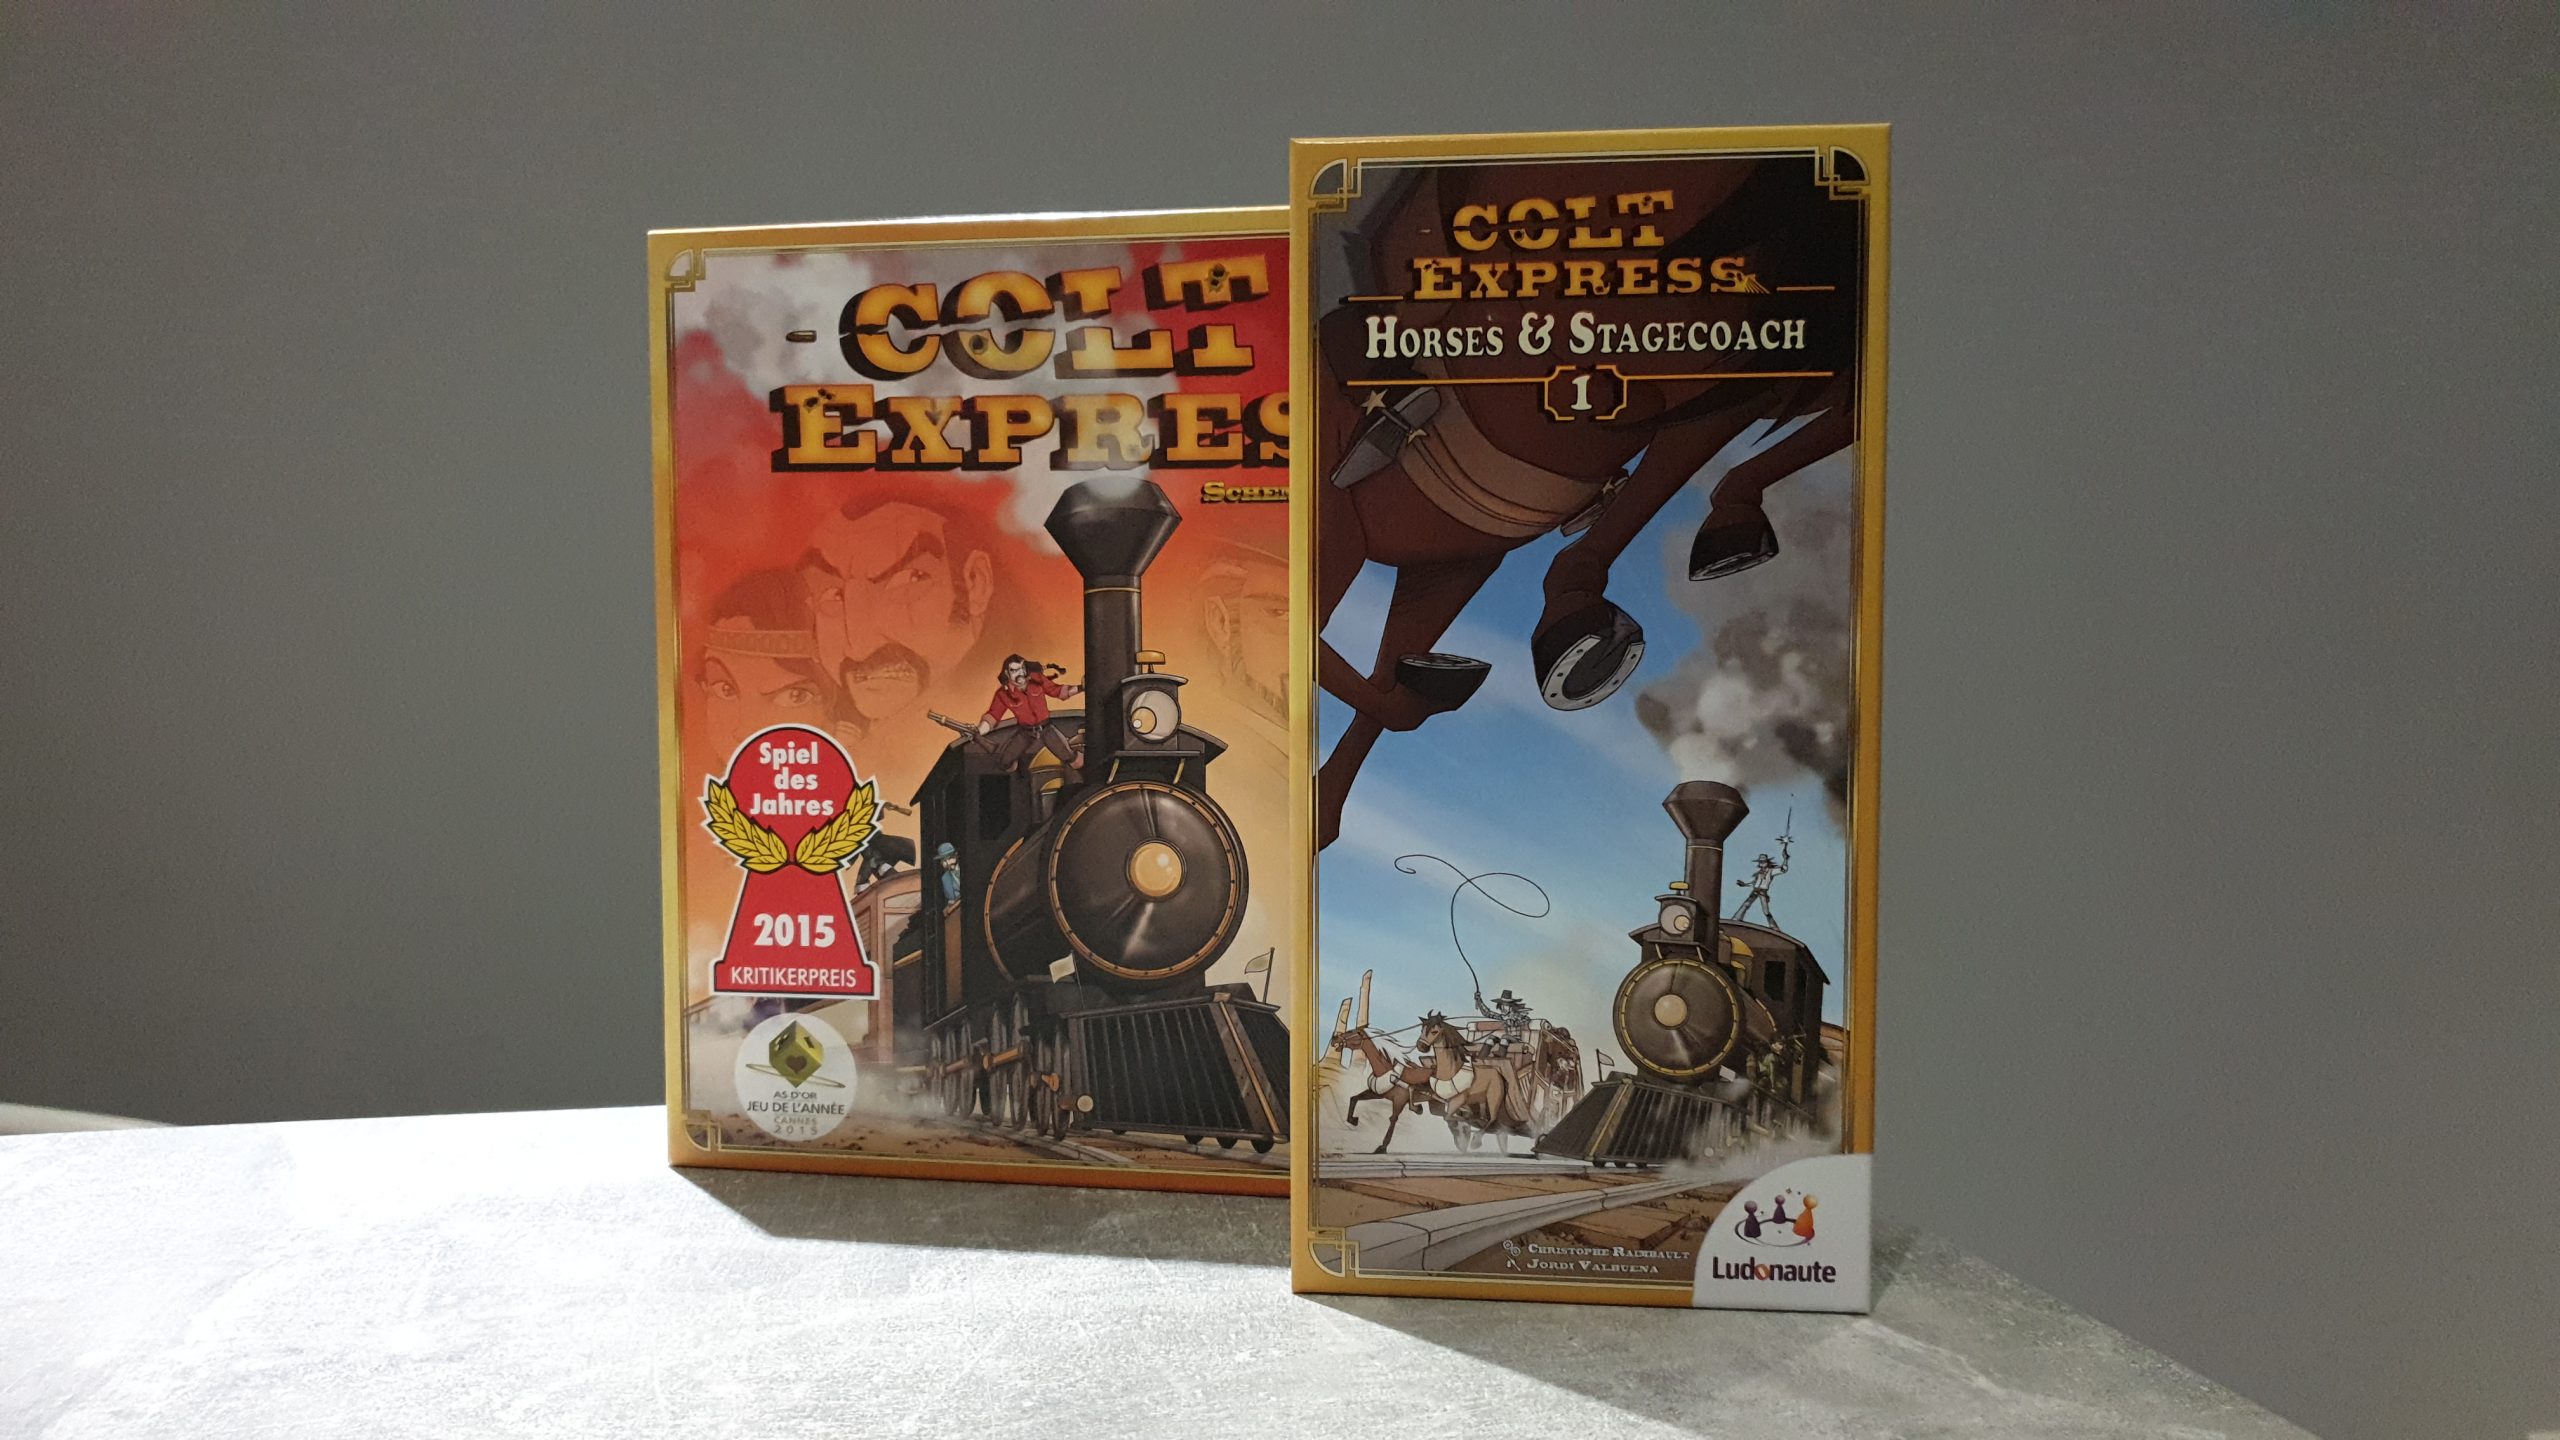 Colt Express Horses & Stagecoach Review